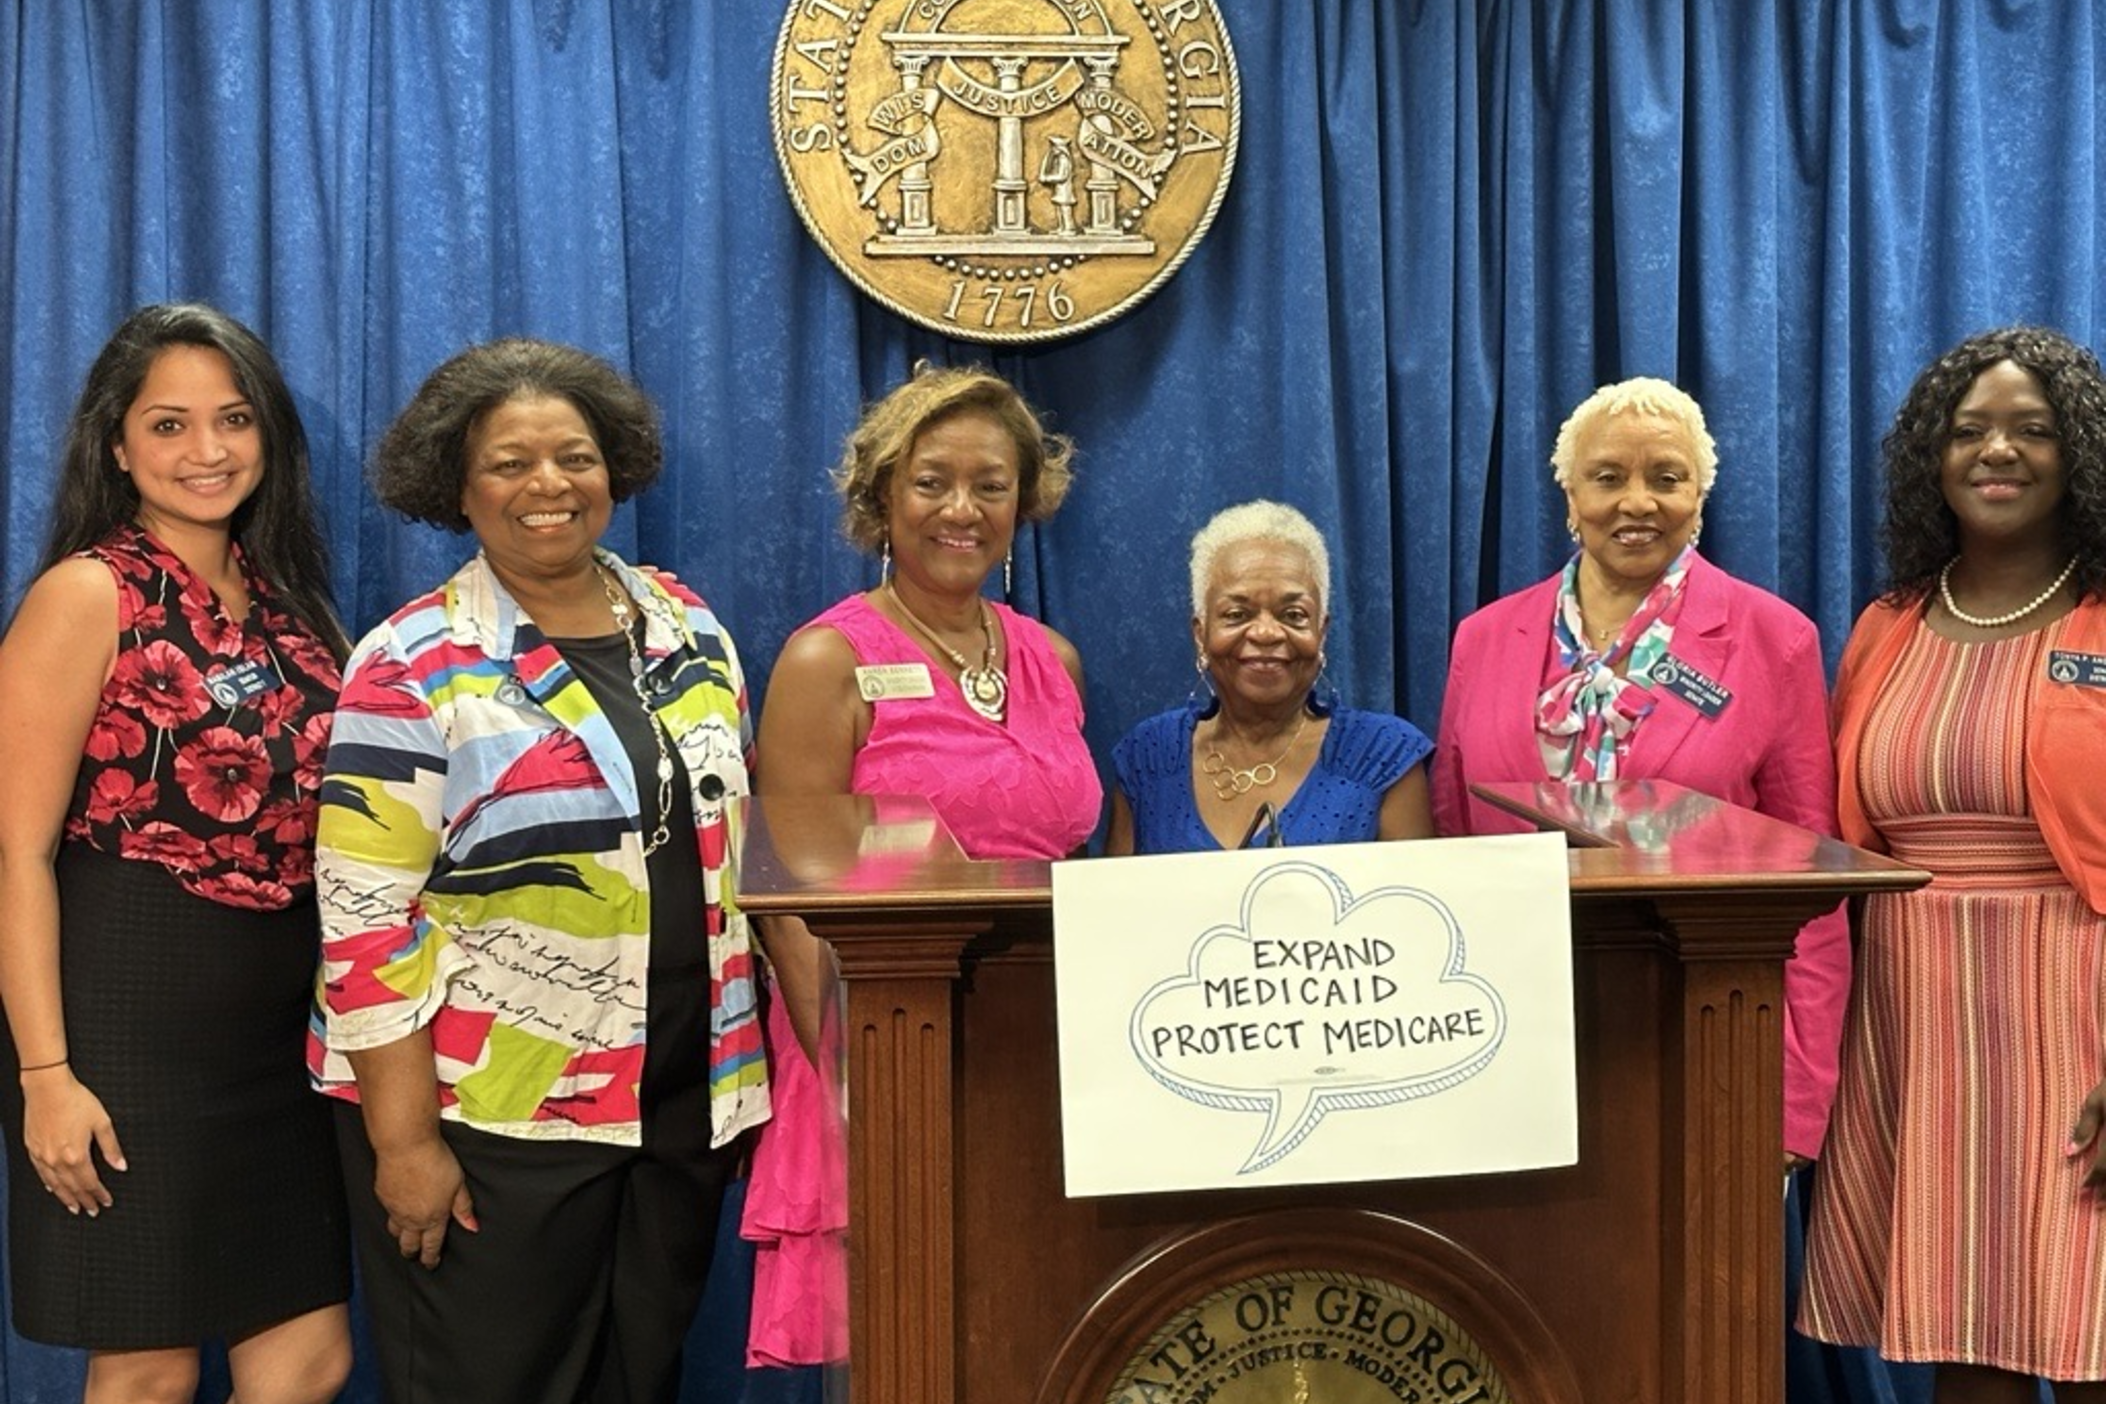 A group of Democrats met at the Georgia Capitol on July 28, 2023 to discuss Medicaid and Medicare.